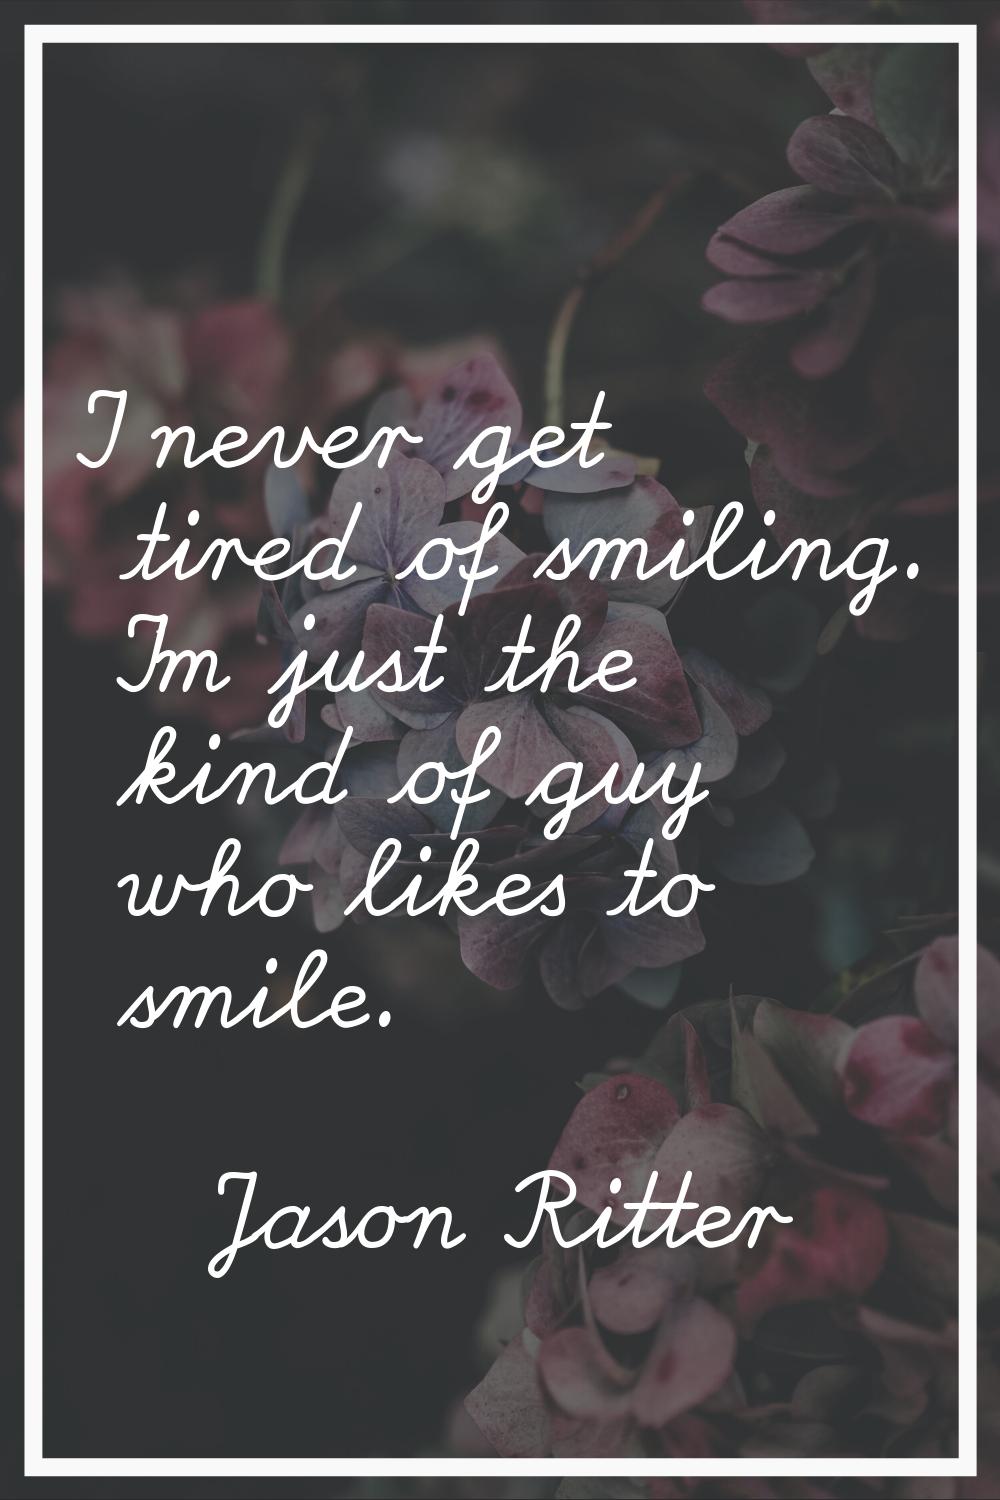 I never get tired of smiling. I'm just the kind of guy who likes to smile.